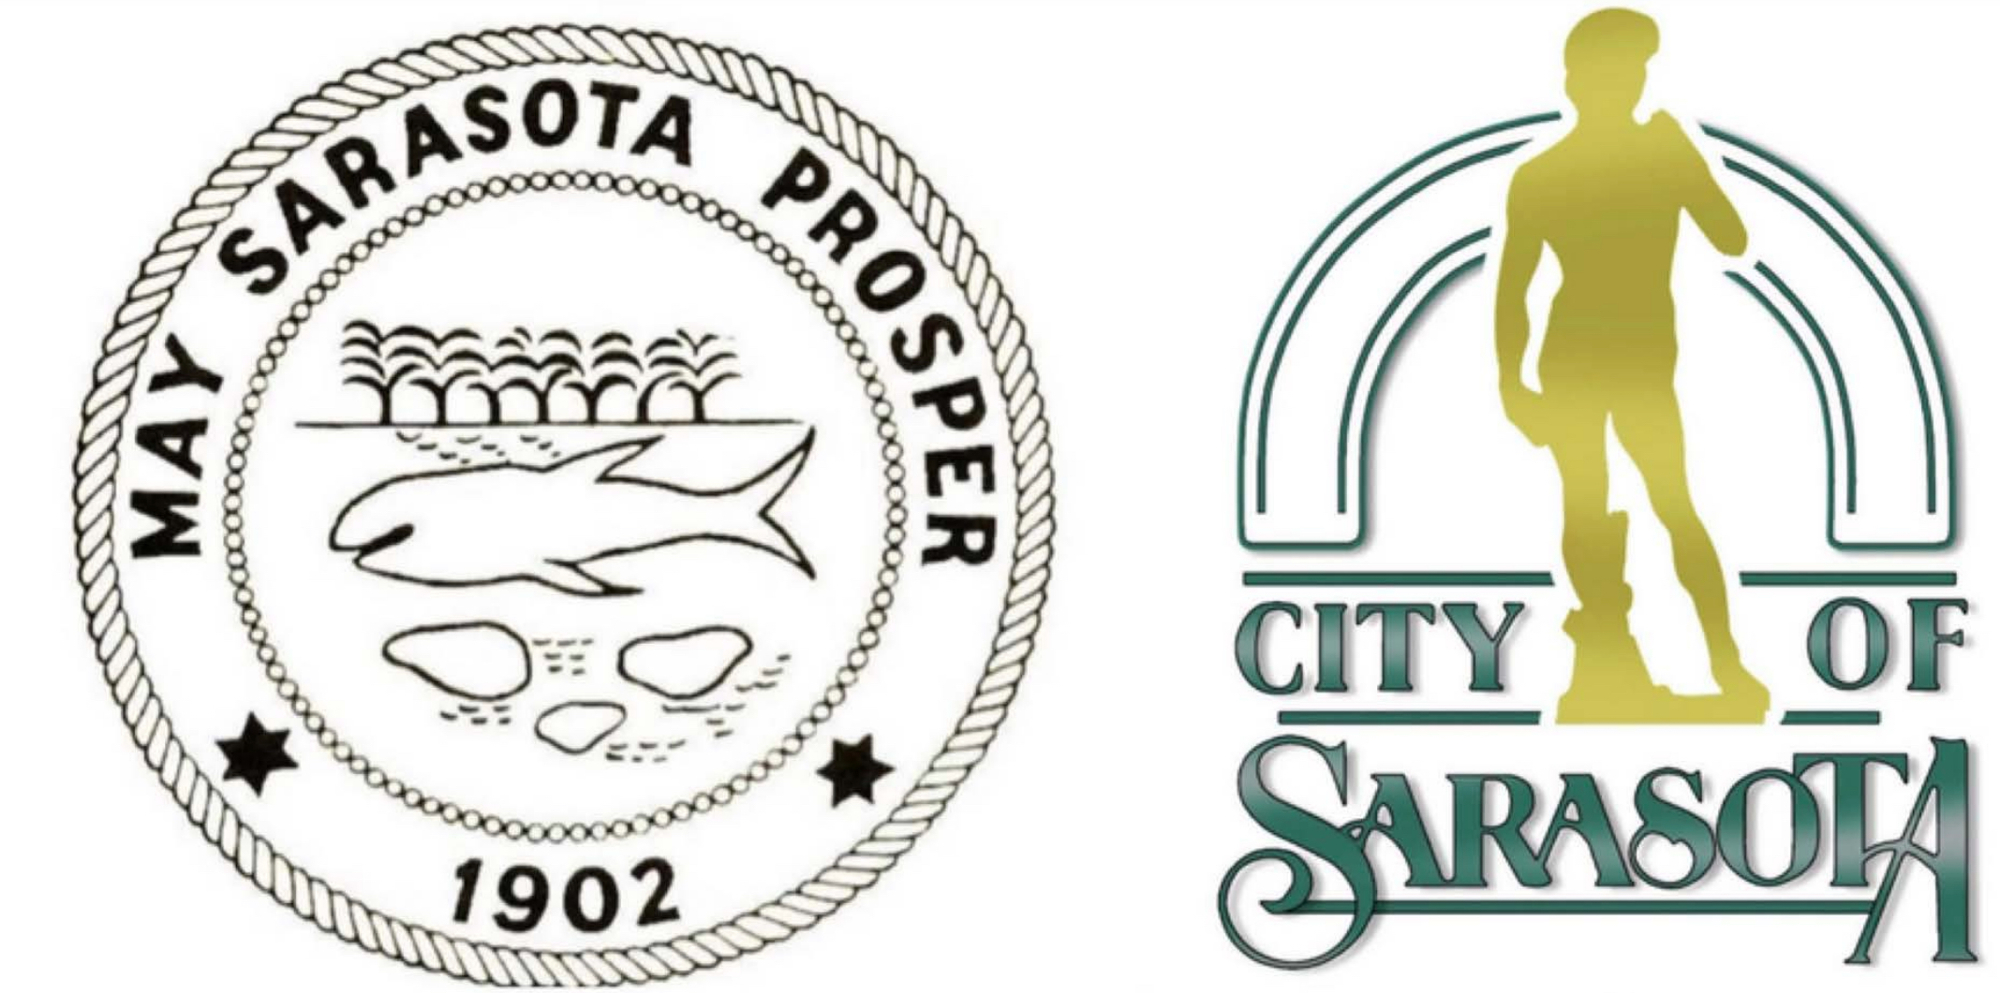 The current city seal (left) and logo.